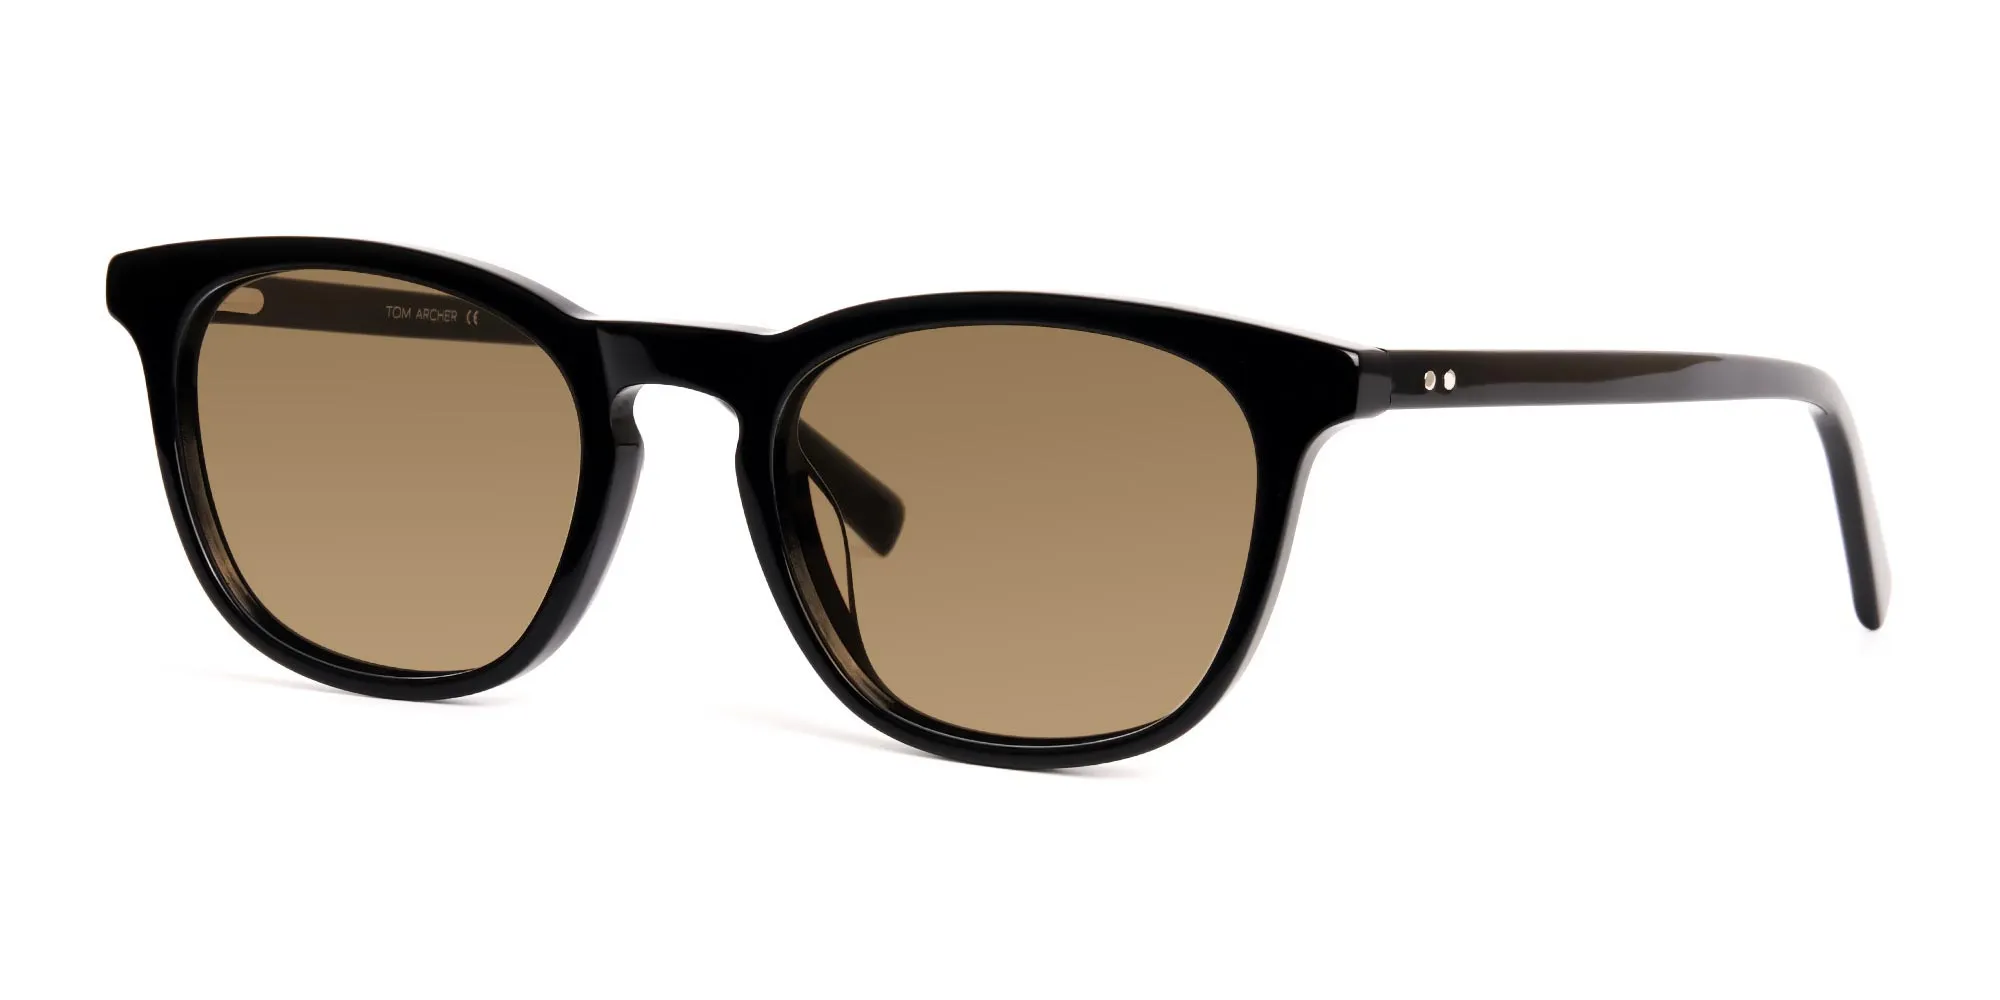 black-thick-square-dark-brown-tinted-sunglasses-frames-2